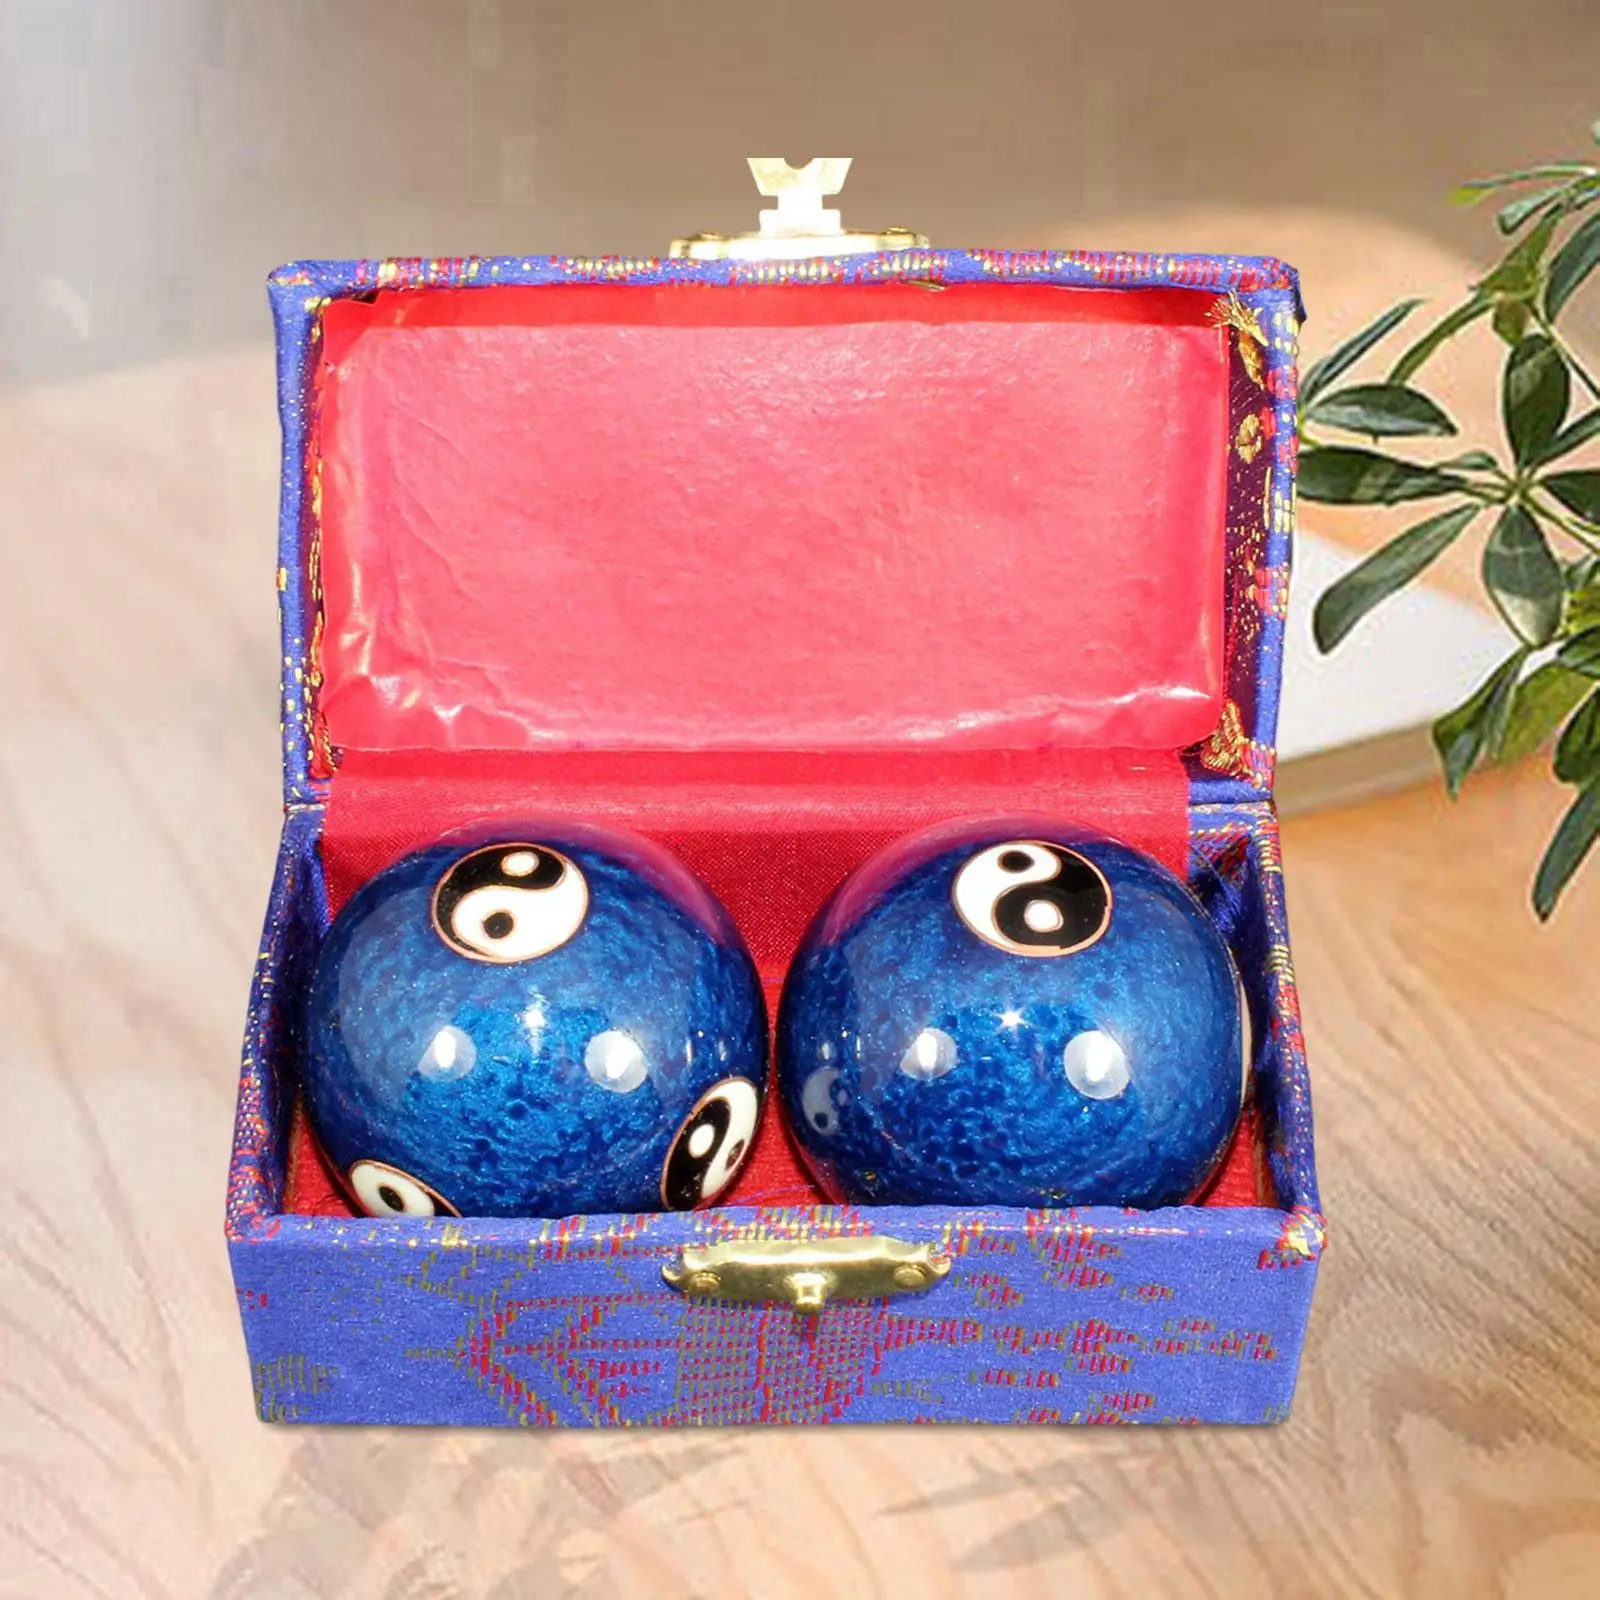 2x Massage Balls with Storage Box Fitness Durable Chinese Exercise Handballs for Seniors Middle Aged People Elderly Parents